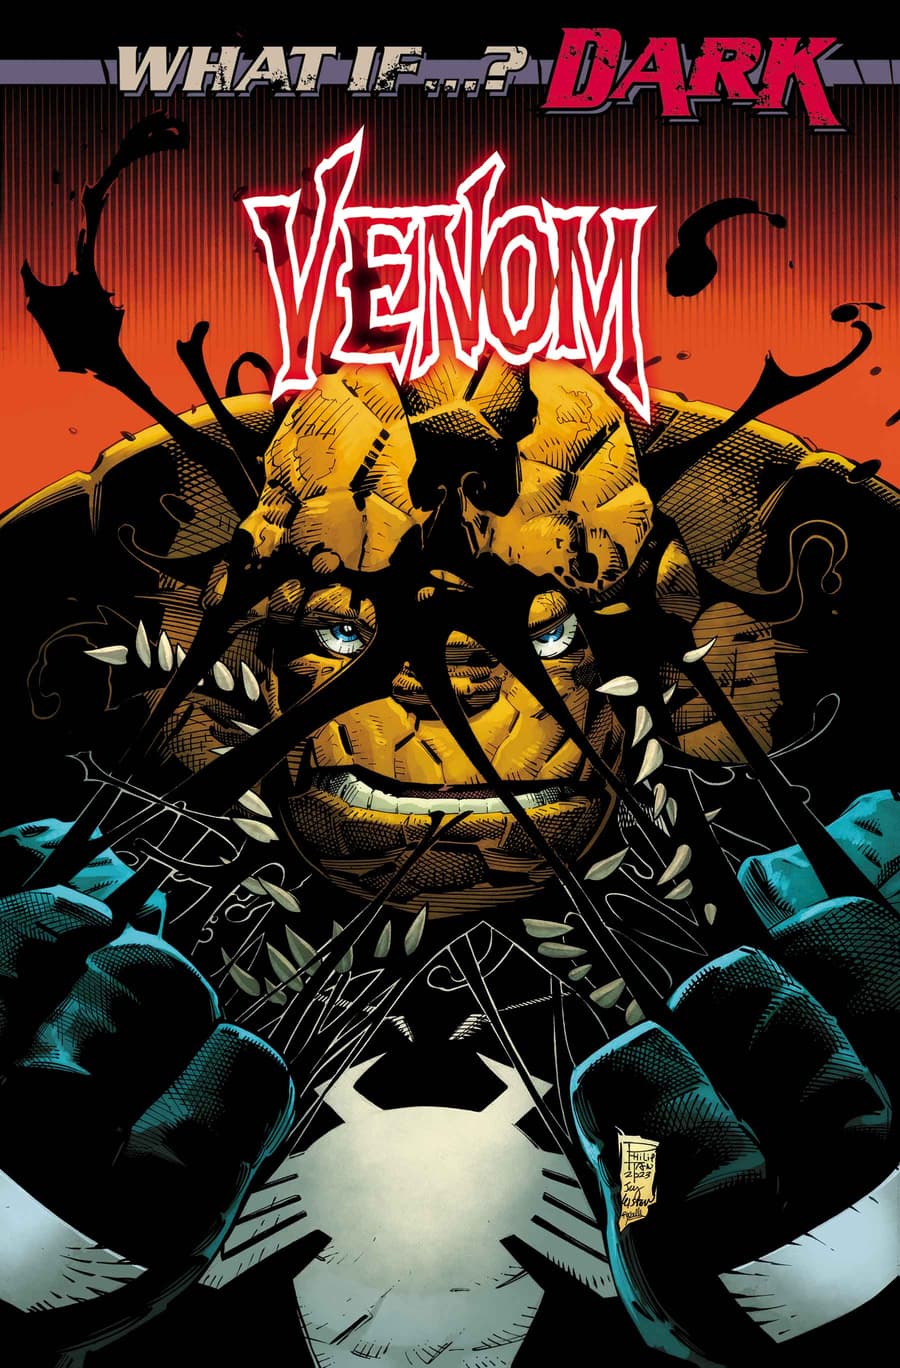 What If? Dark: Venom #1 cover by Philip Tan